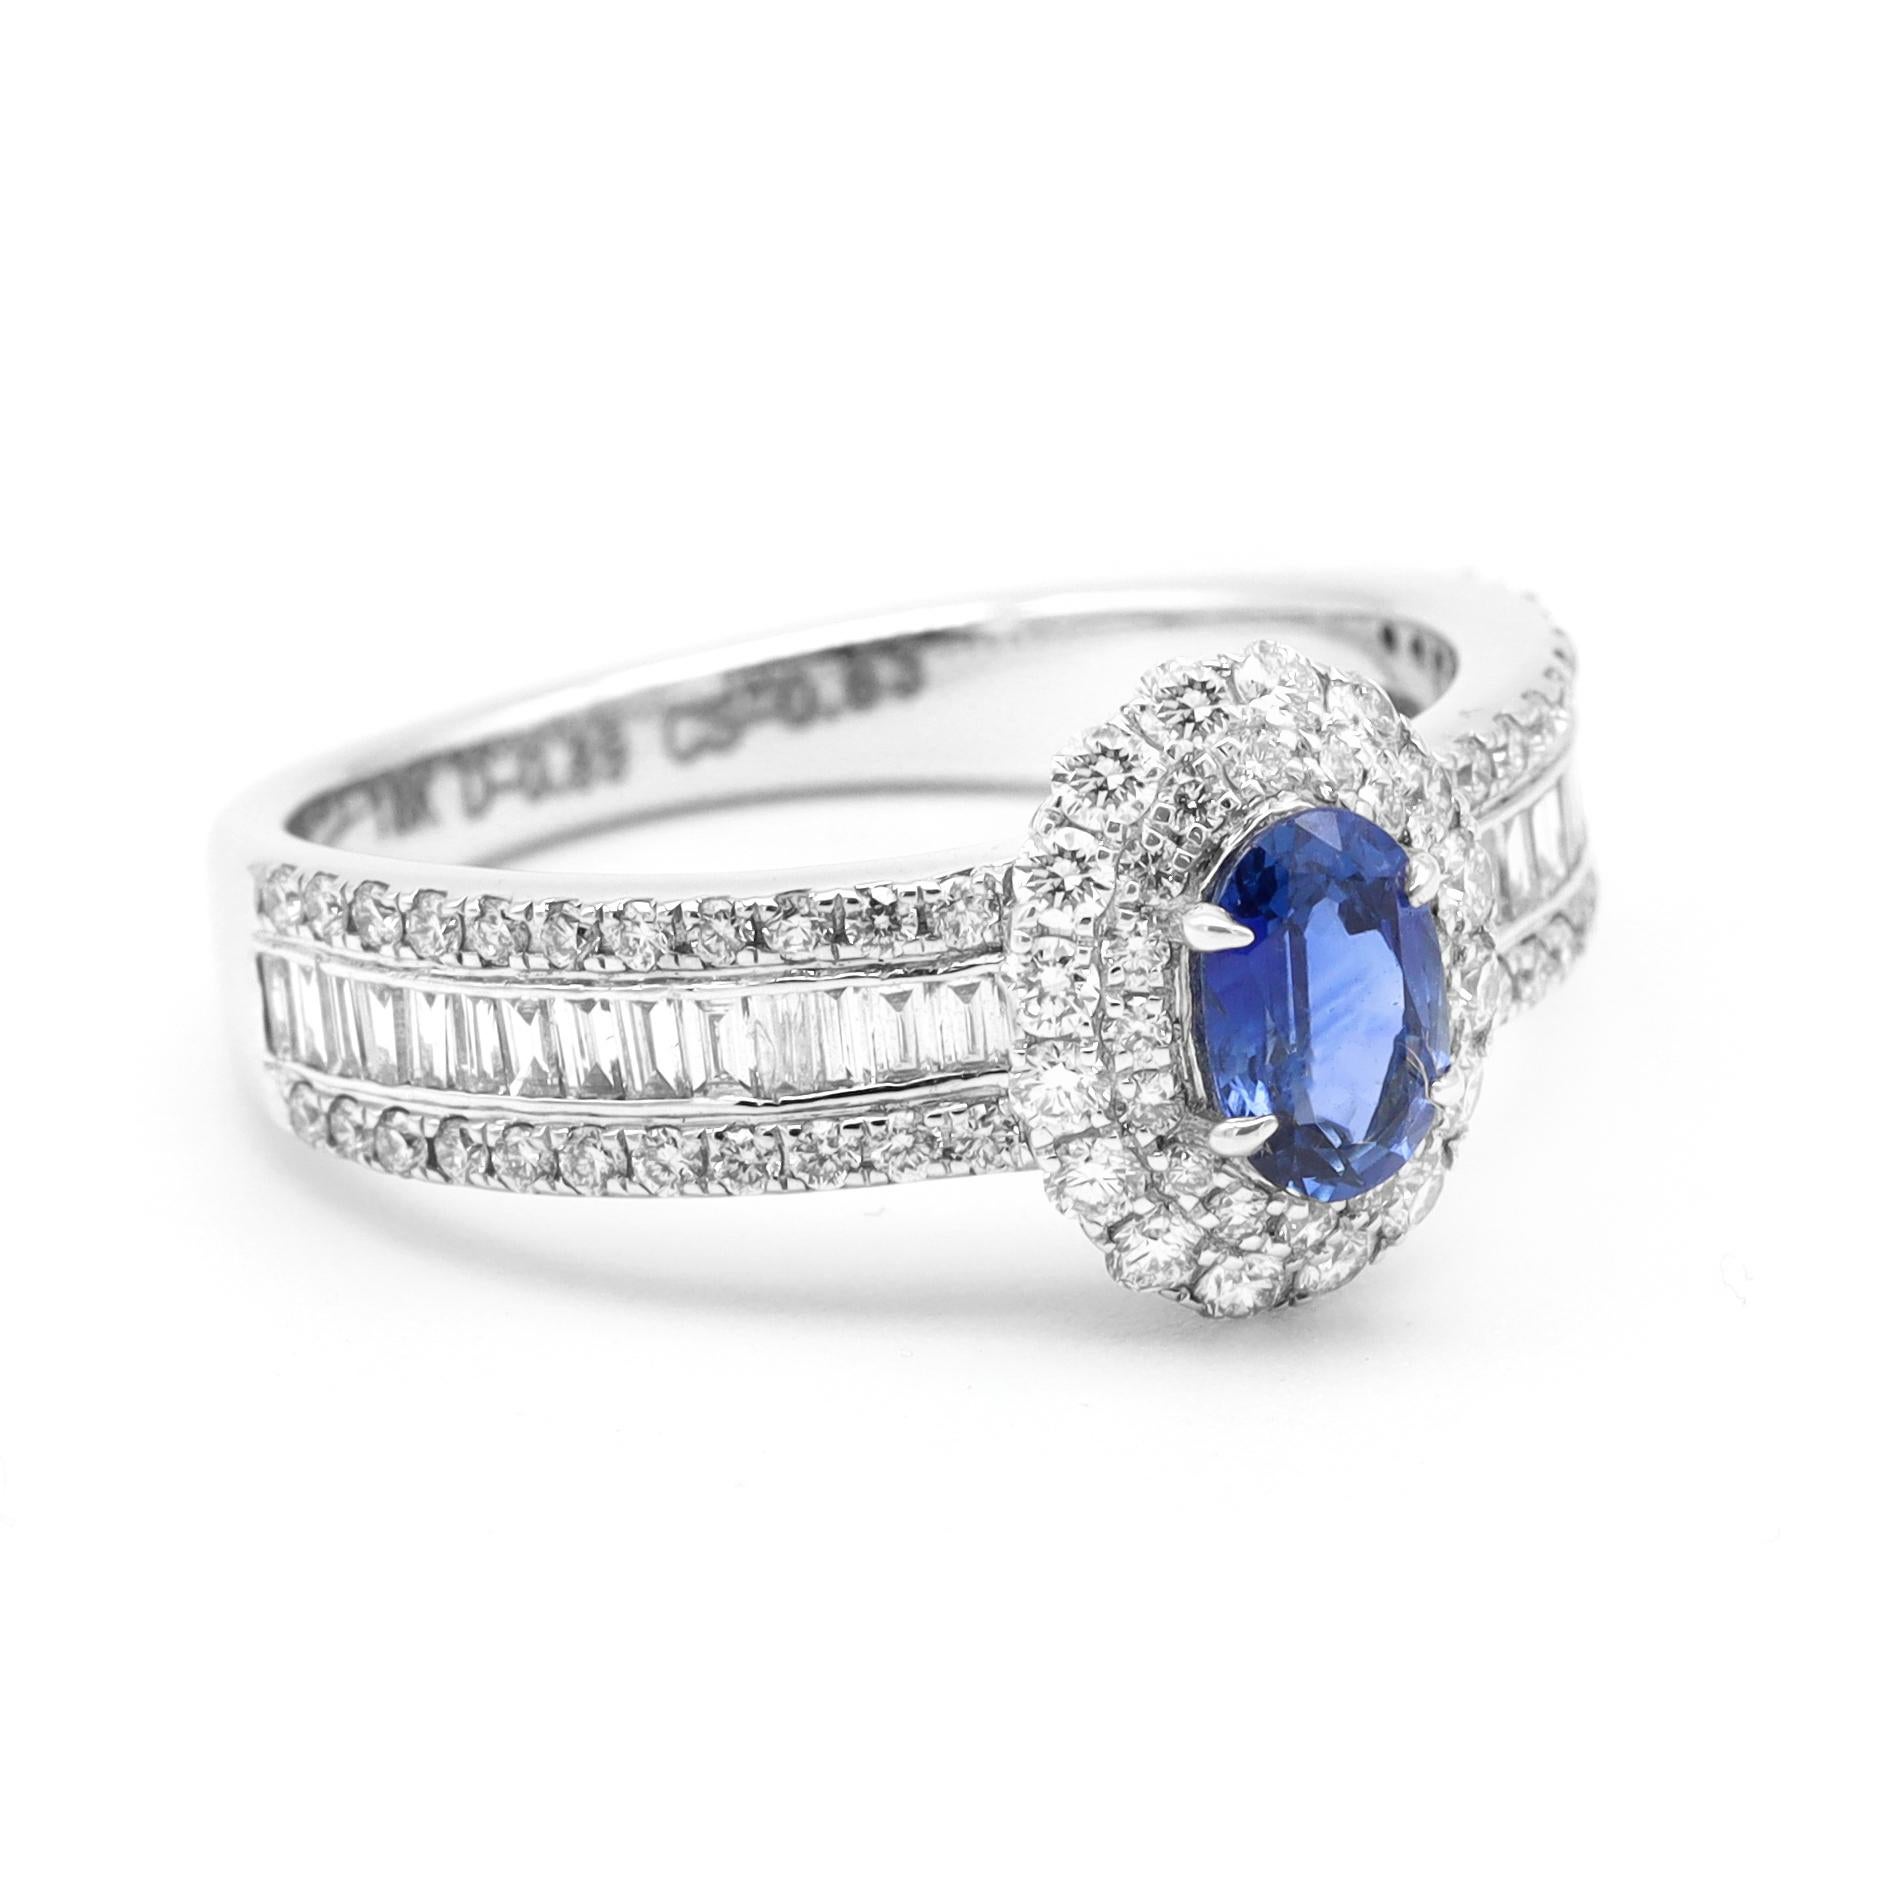 18 Karat White Gold Blue Sapphire and Diamond Double Cluster Band Ring

This enriching Prussian color blue oval sapphire and double cluster round diamond ring is mesmerizing. The vibrant oval blue sapphire solitaire is firstly surrounded by a halo